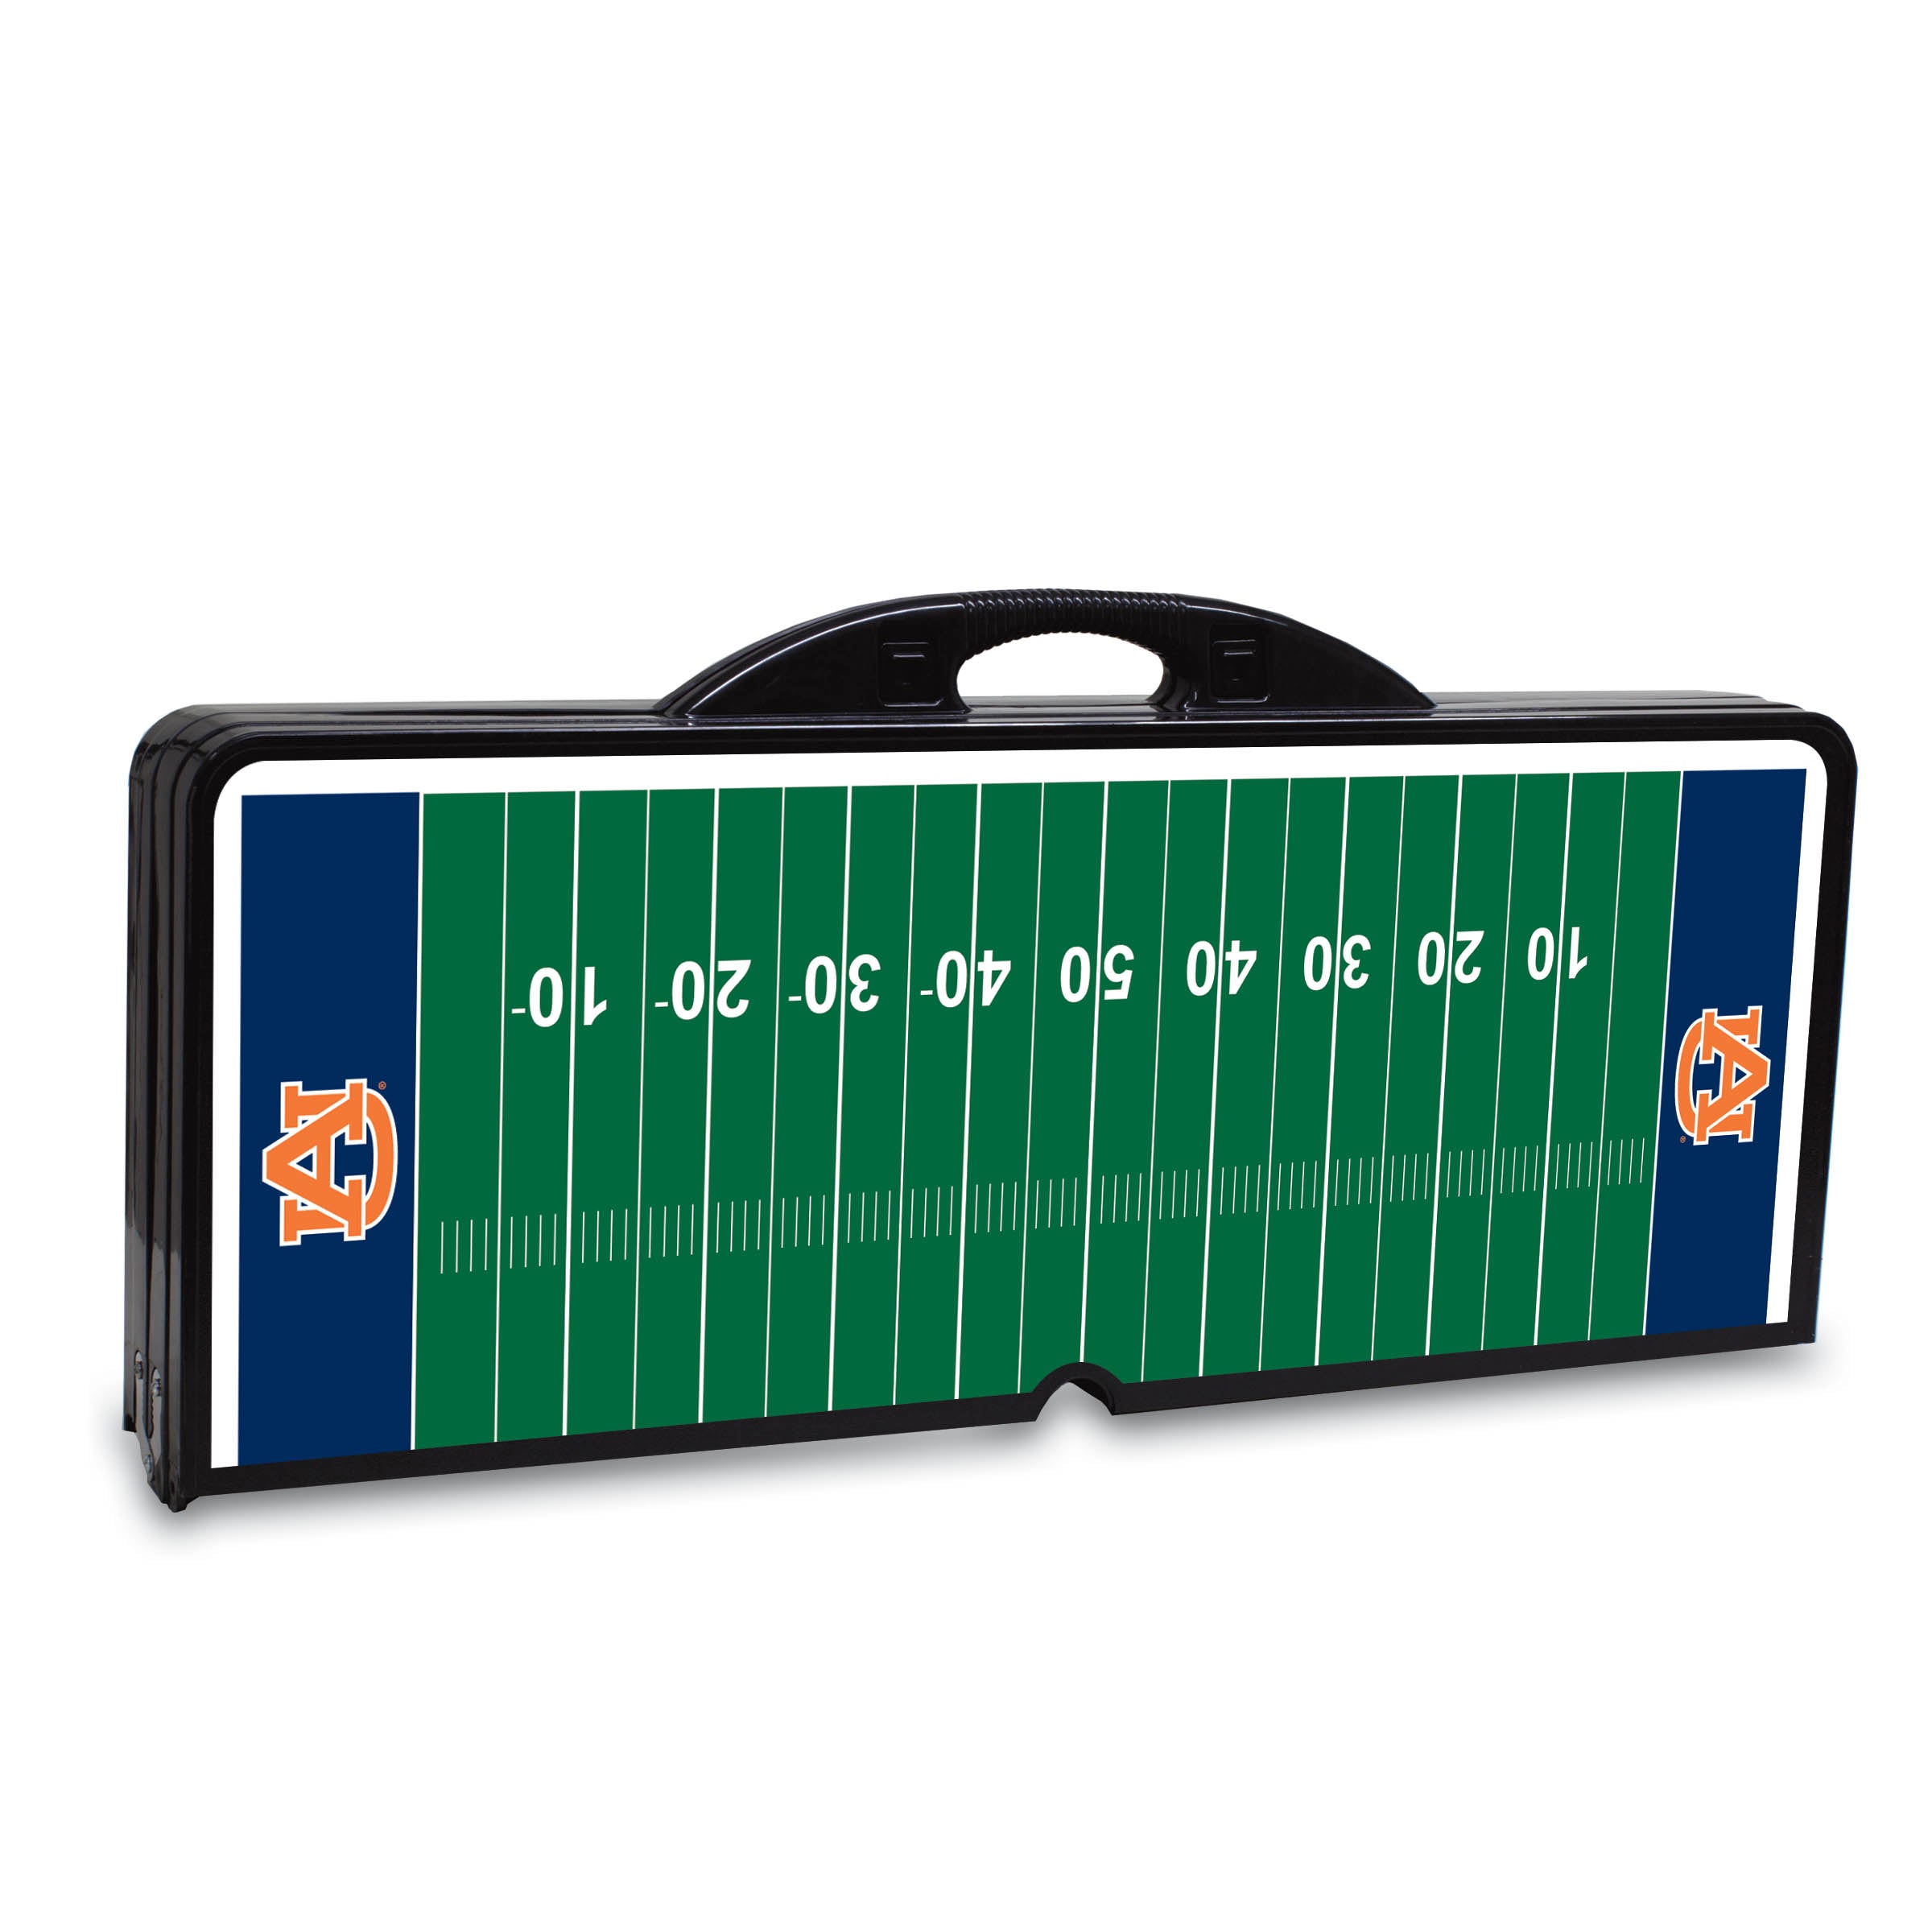 Auburn Tigers Football Field - Picnic Table Portable Folding Table with Seats